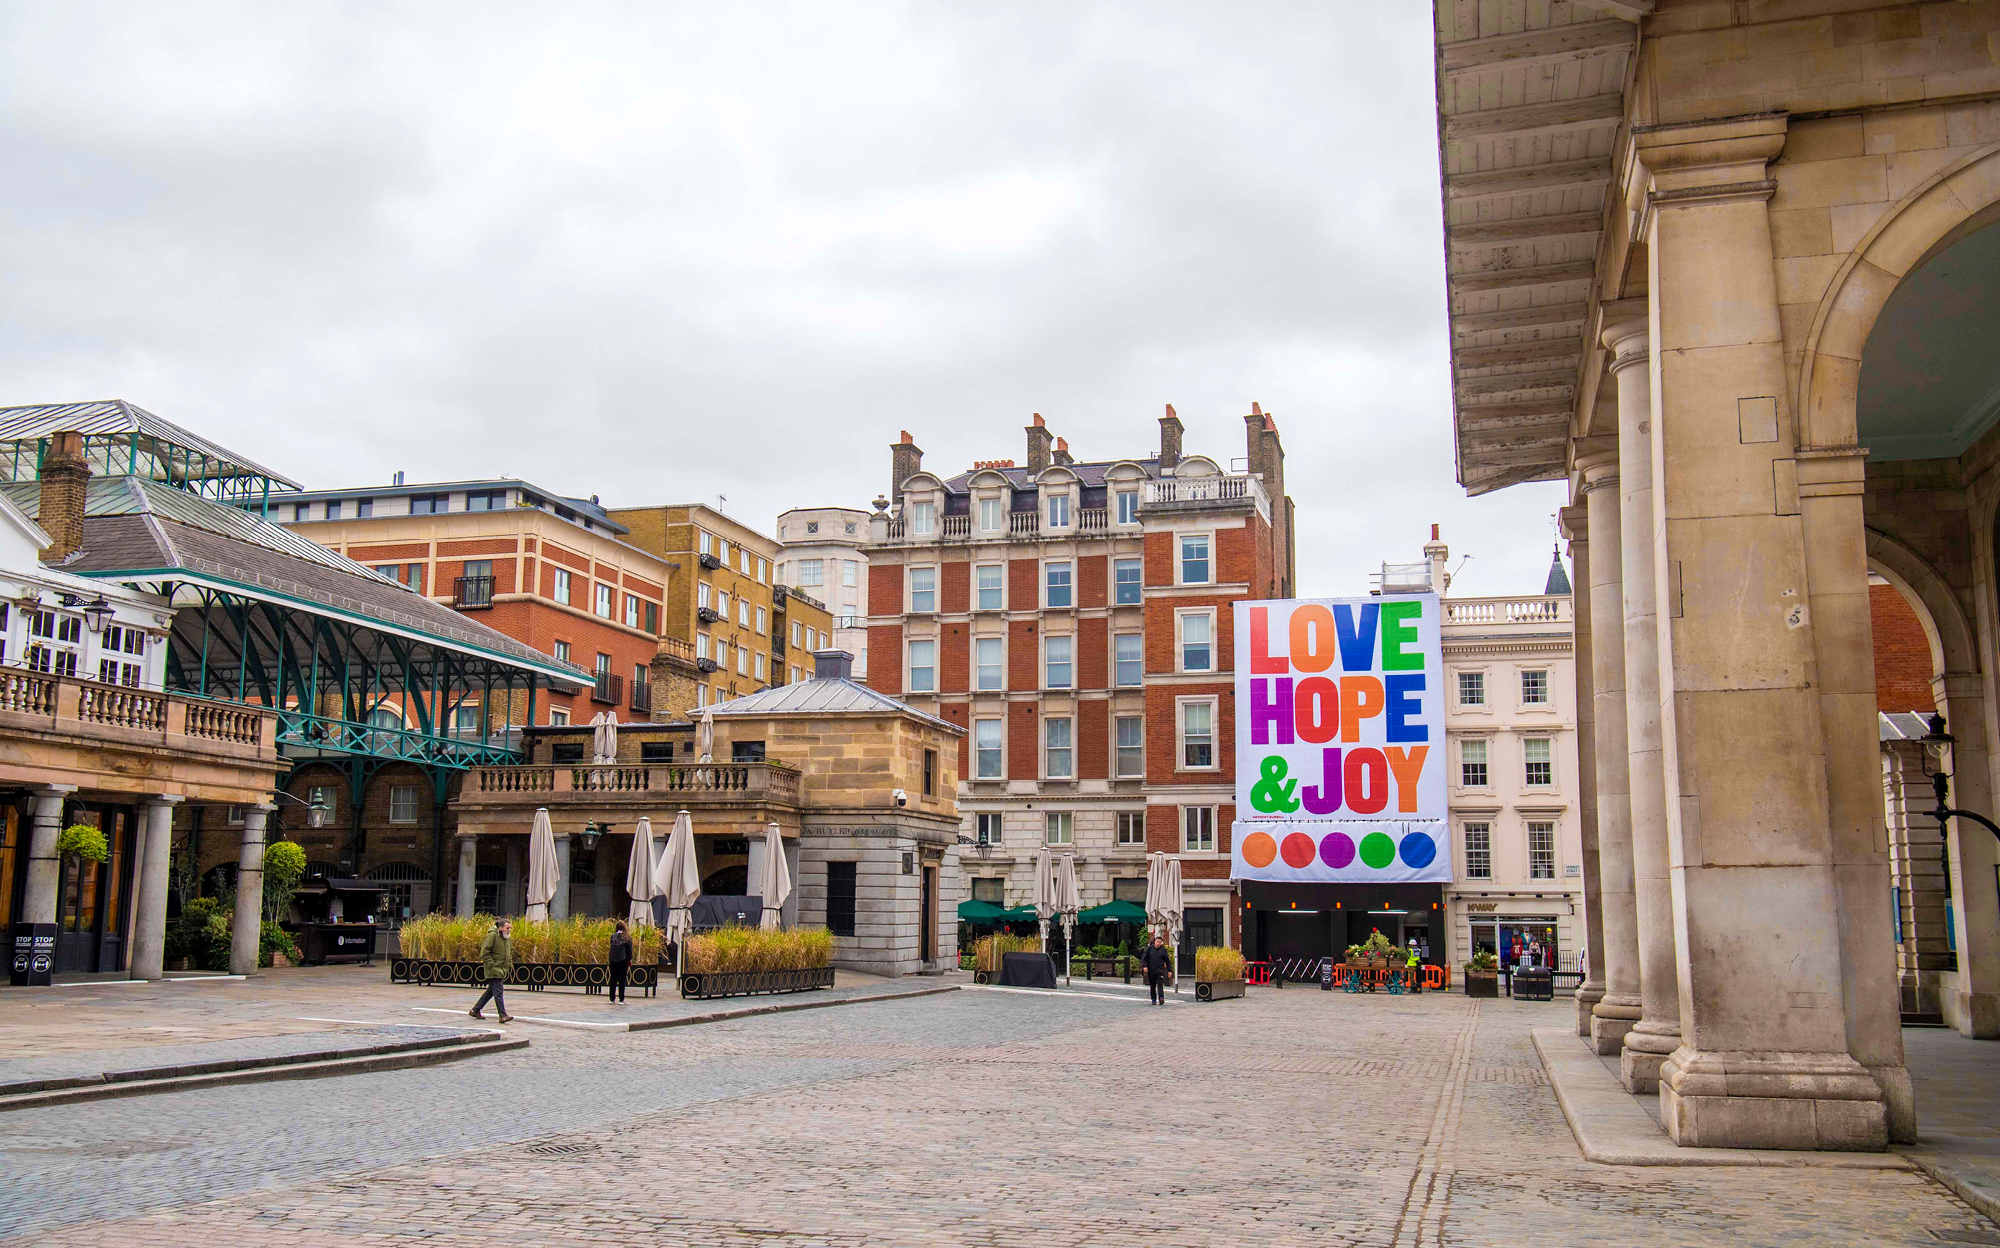 Love, Hope & Joy is Anthony Burrill's love note to London and the world